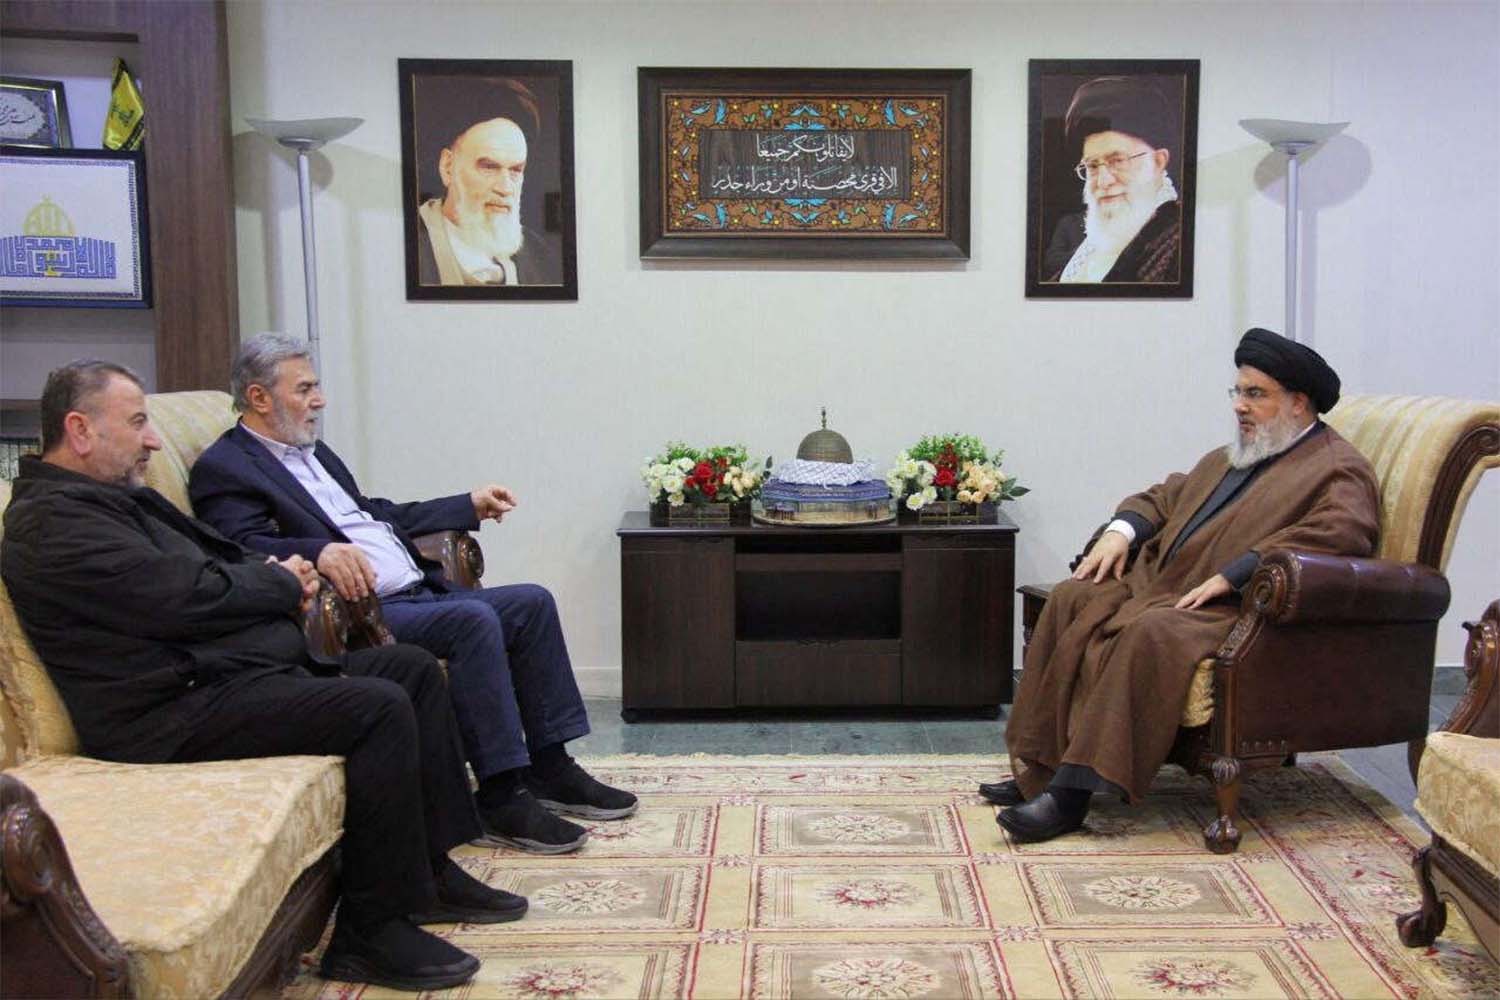 Nasrallah meeting with top leaders of the Palestinian militant factions Hamas and Islamic Jihad